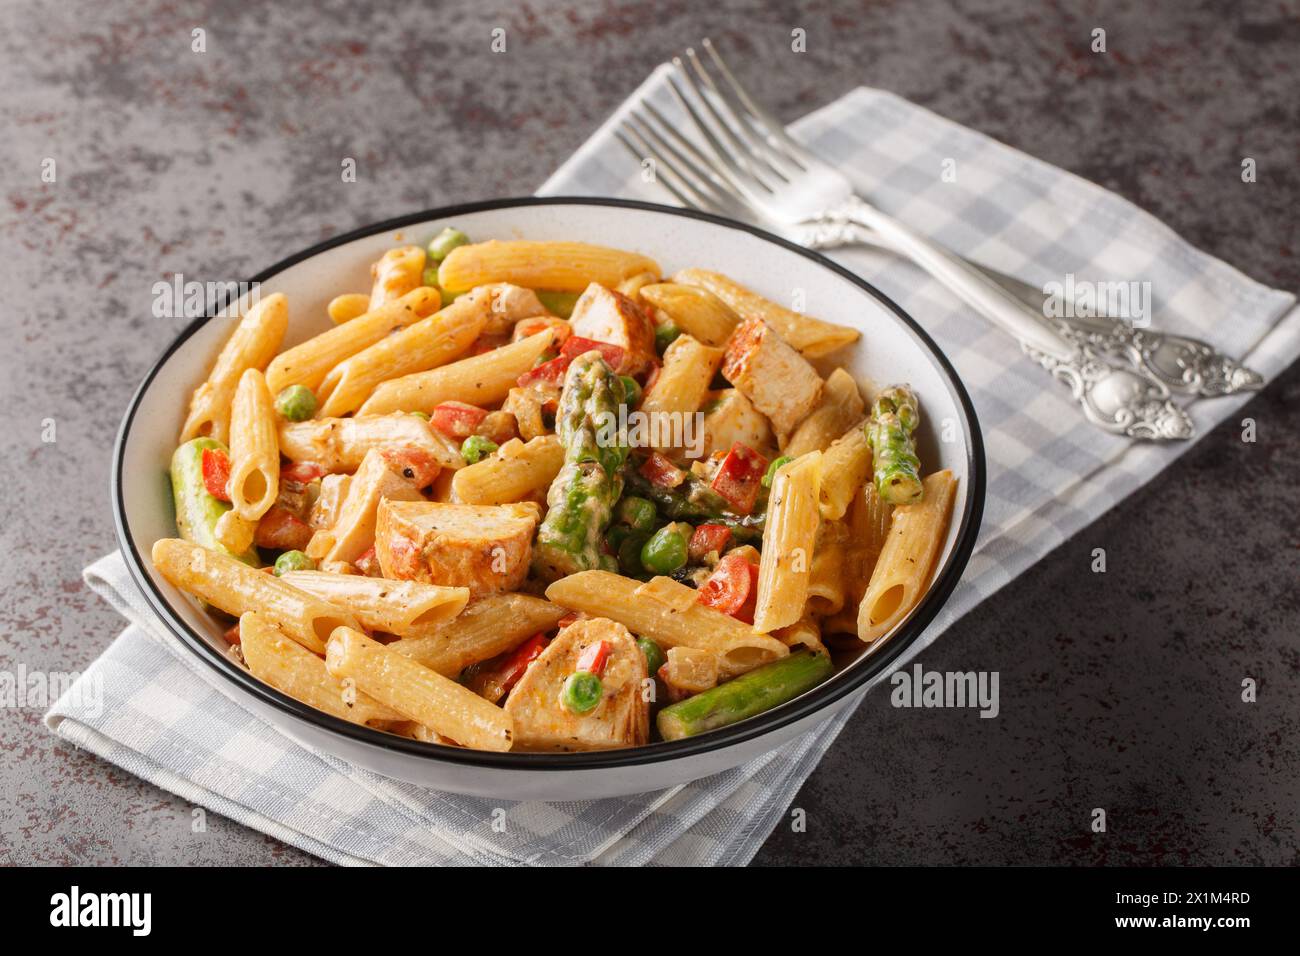 Creamy chipotle chicken penne pasta with asparagus, peppers, green peas, onion and garlic close-up in a bowl on the table. horizontal Stock Photo